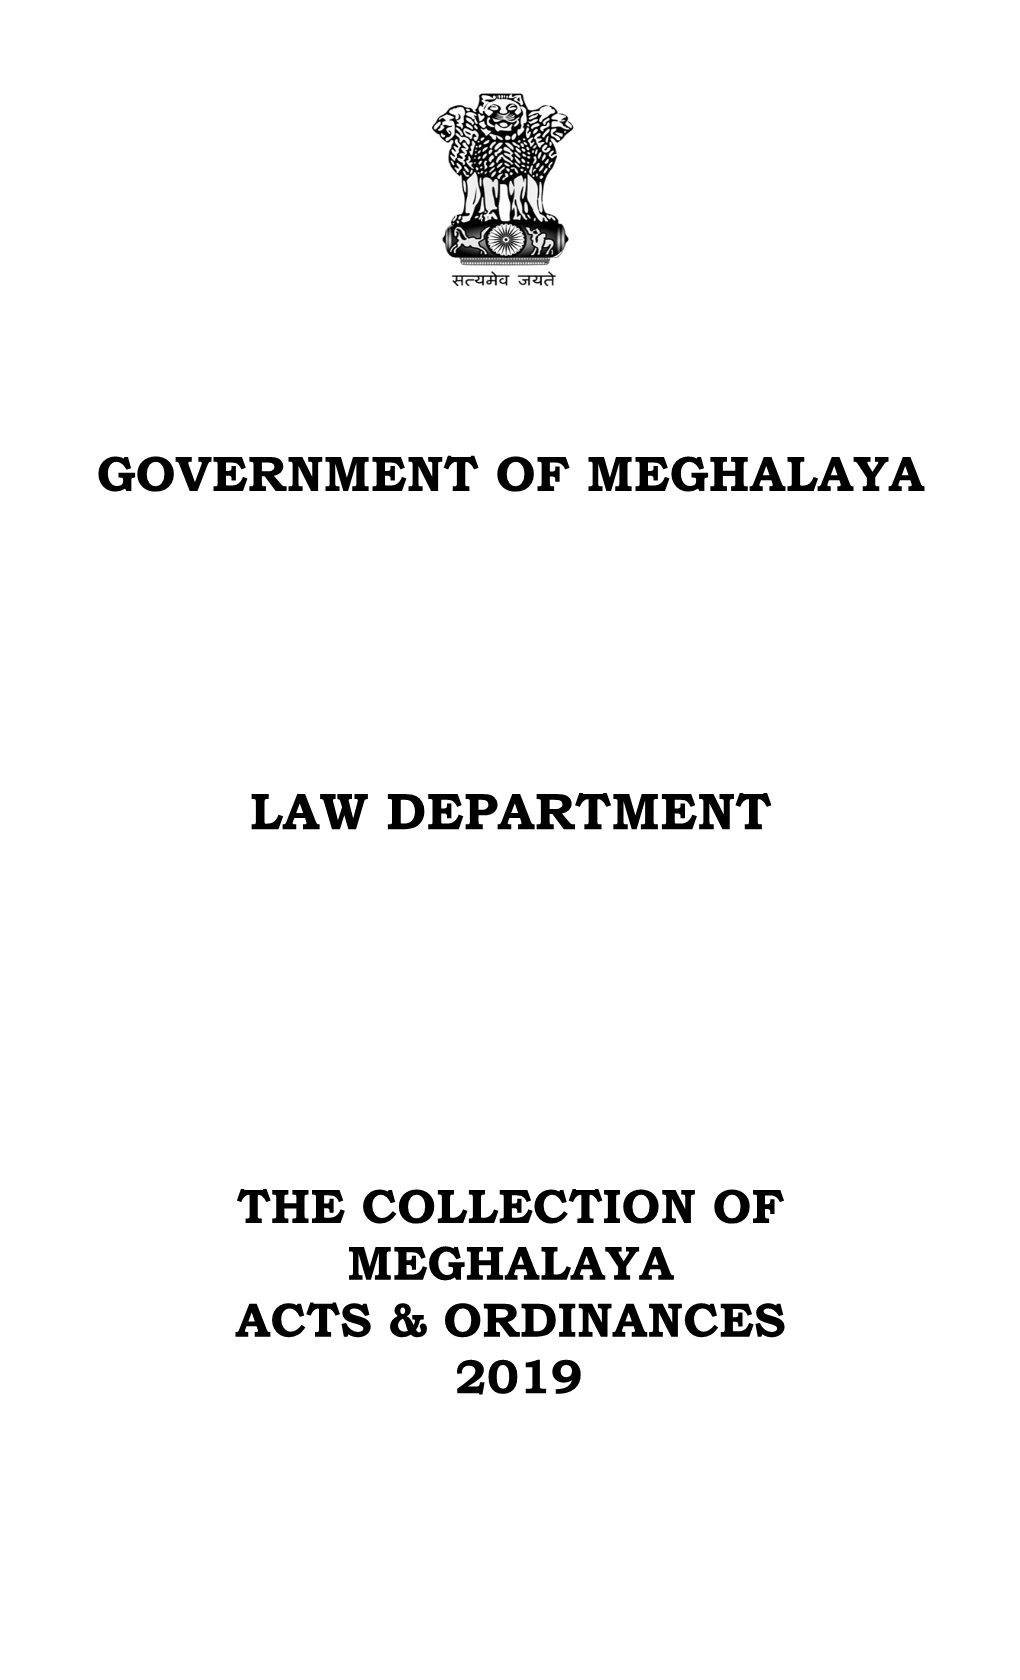 Collection of Meghalaya Acts and Ordinances 2019